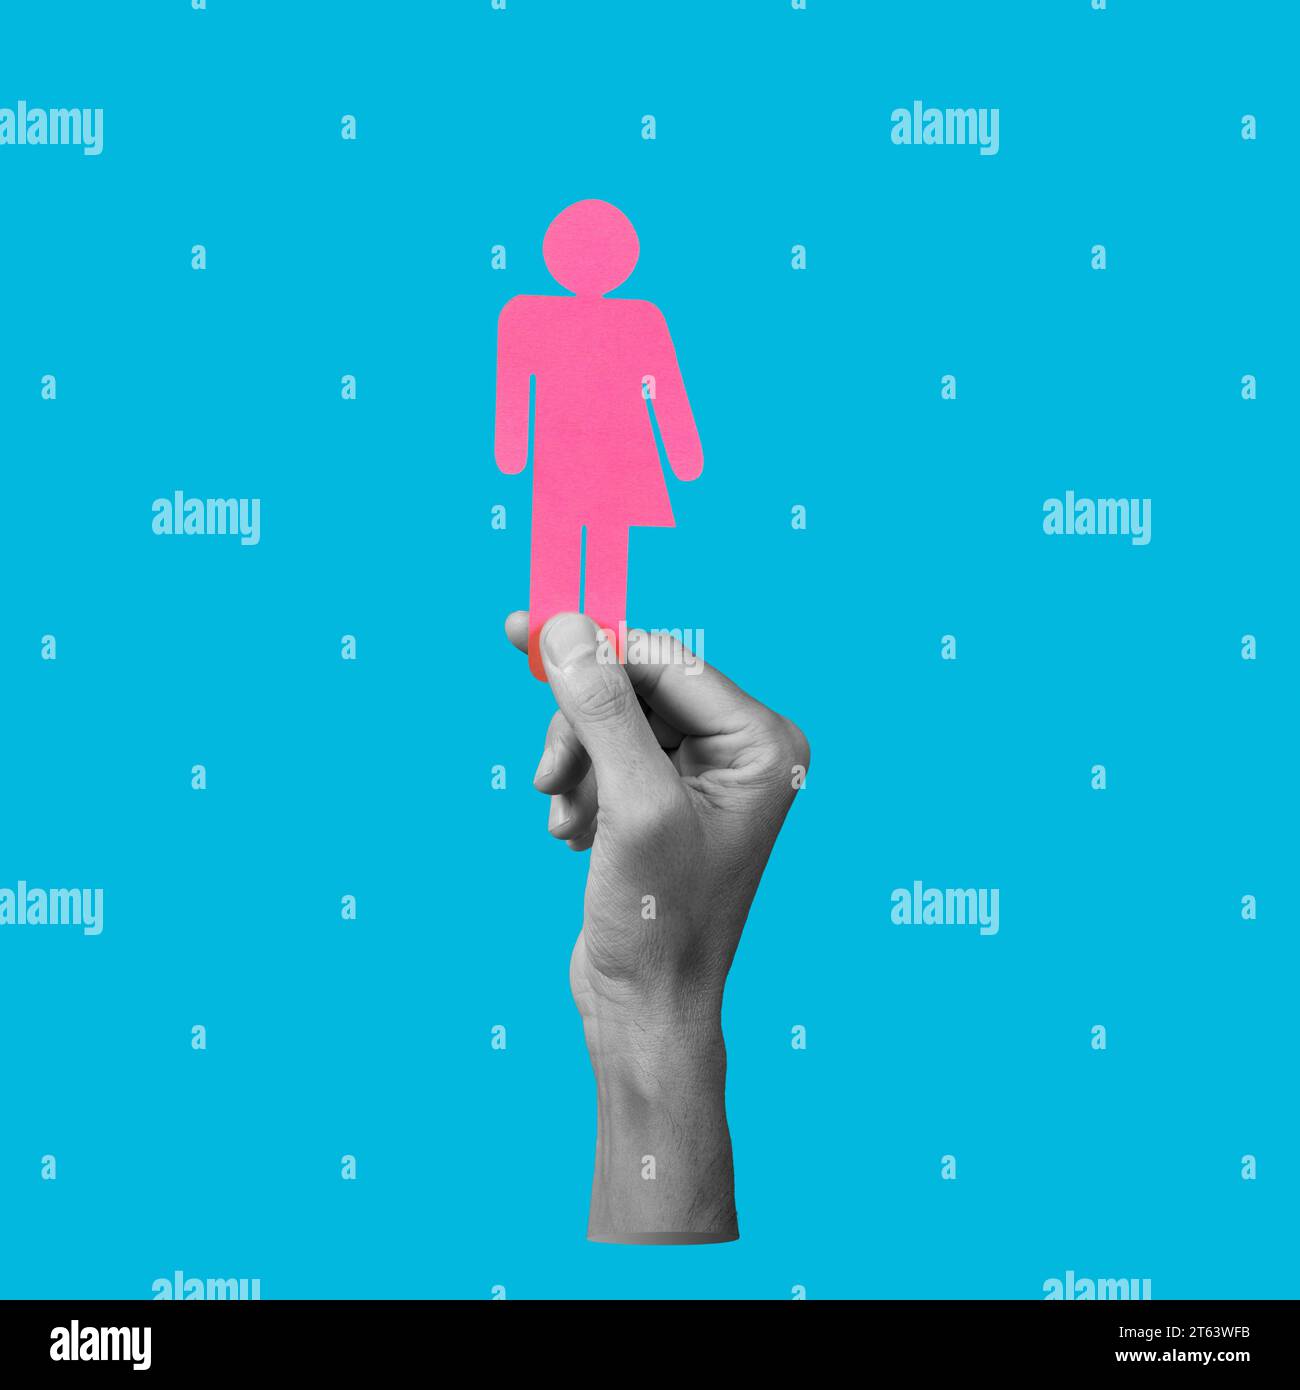 the hand of a man in black and white holding a pink gender neutral icon on a blue background Stock Photo